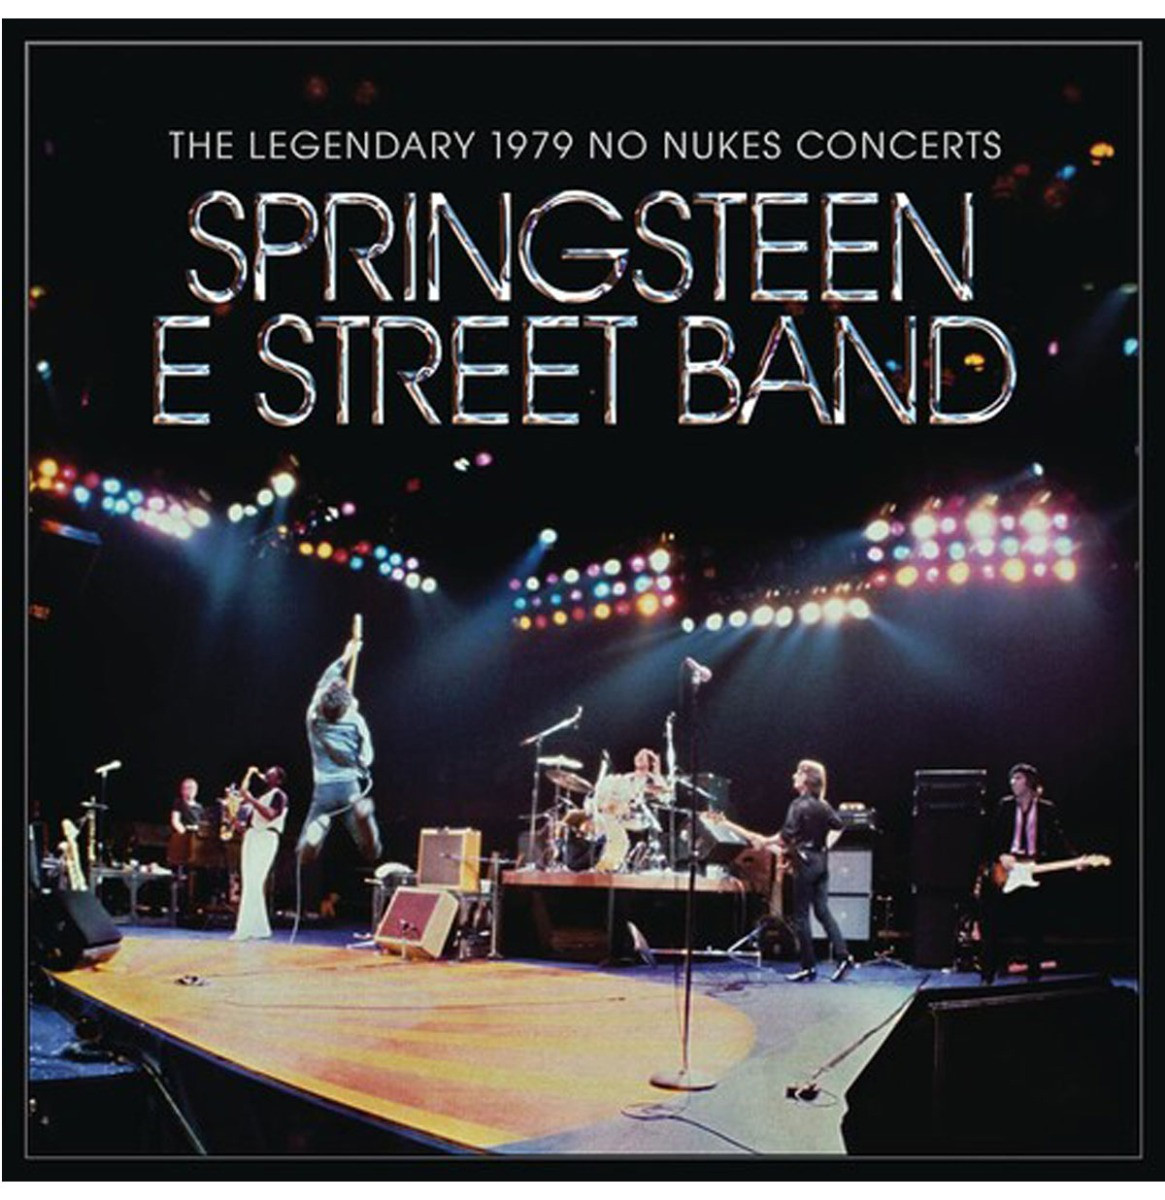 Bruce Springsteen & The E-Street Band - The Legendary 1979 No Nukes Concerts 2LP